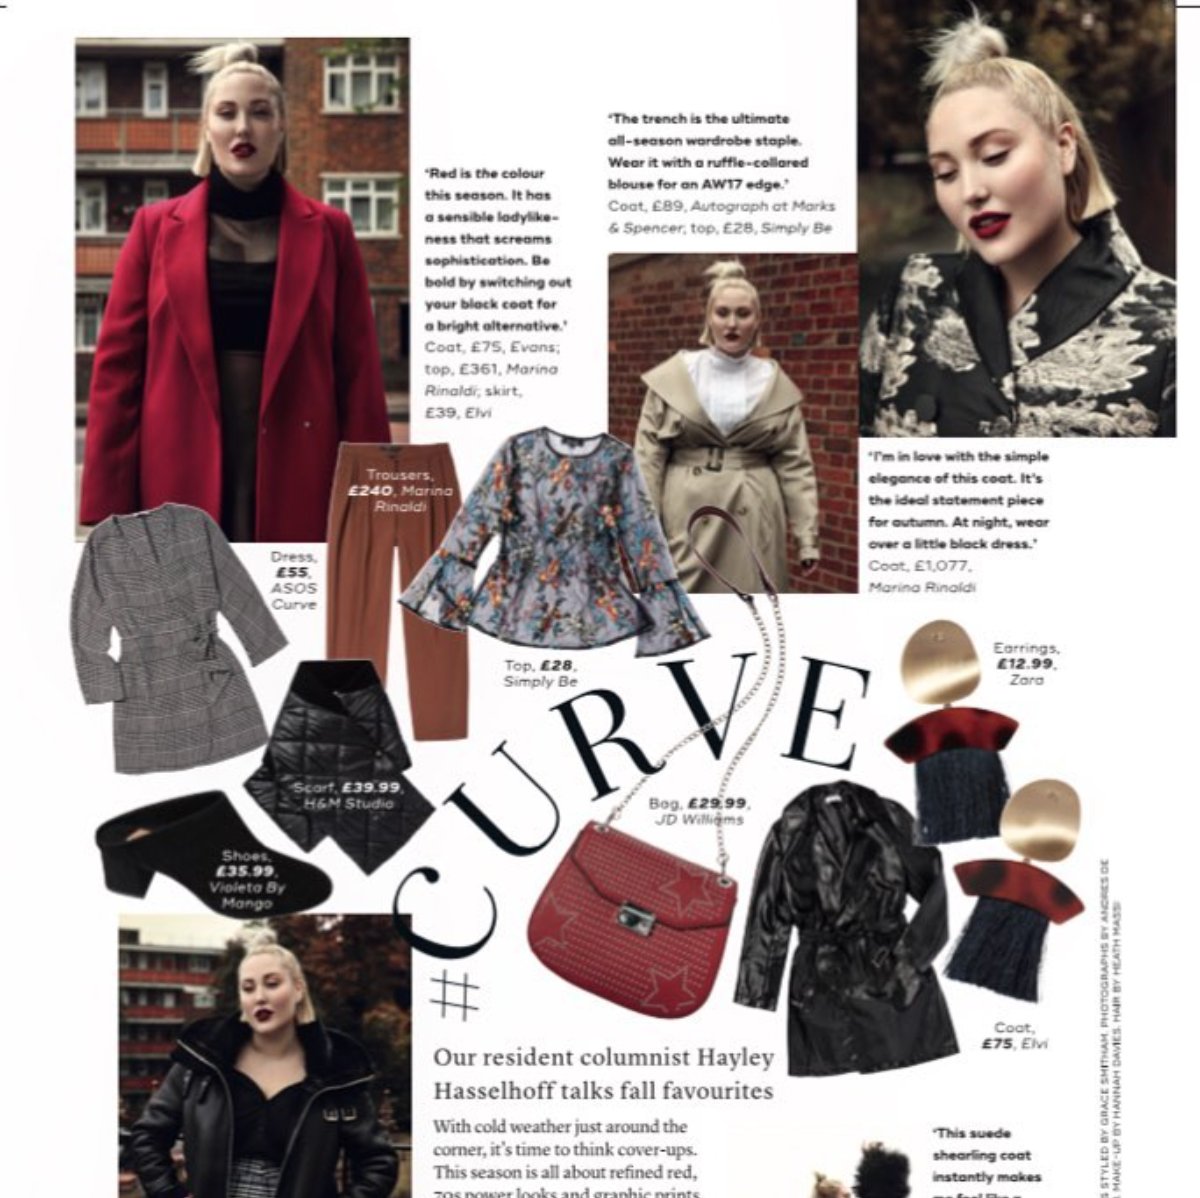 The Hassel keeps coming ! Check out #Curve Page...Marie Claire October issue U.K. https://t.co/kntm4Cta9P